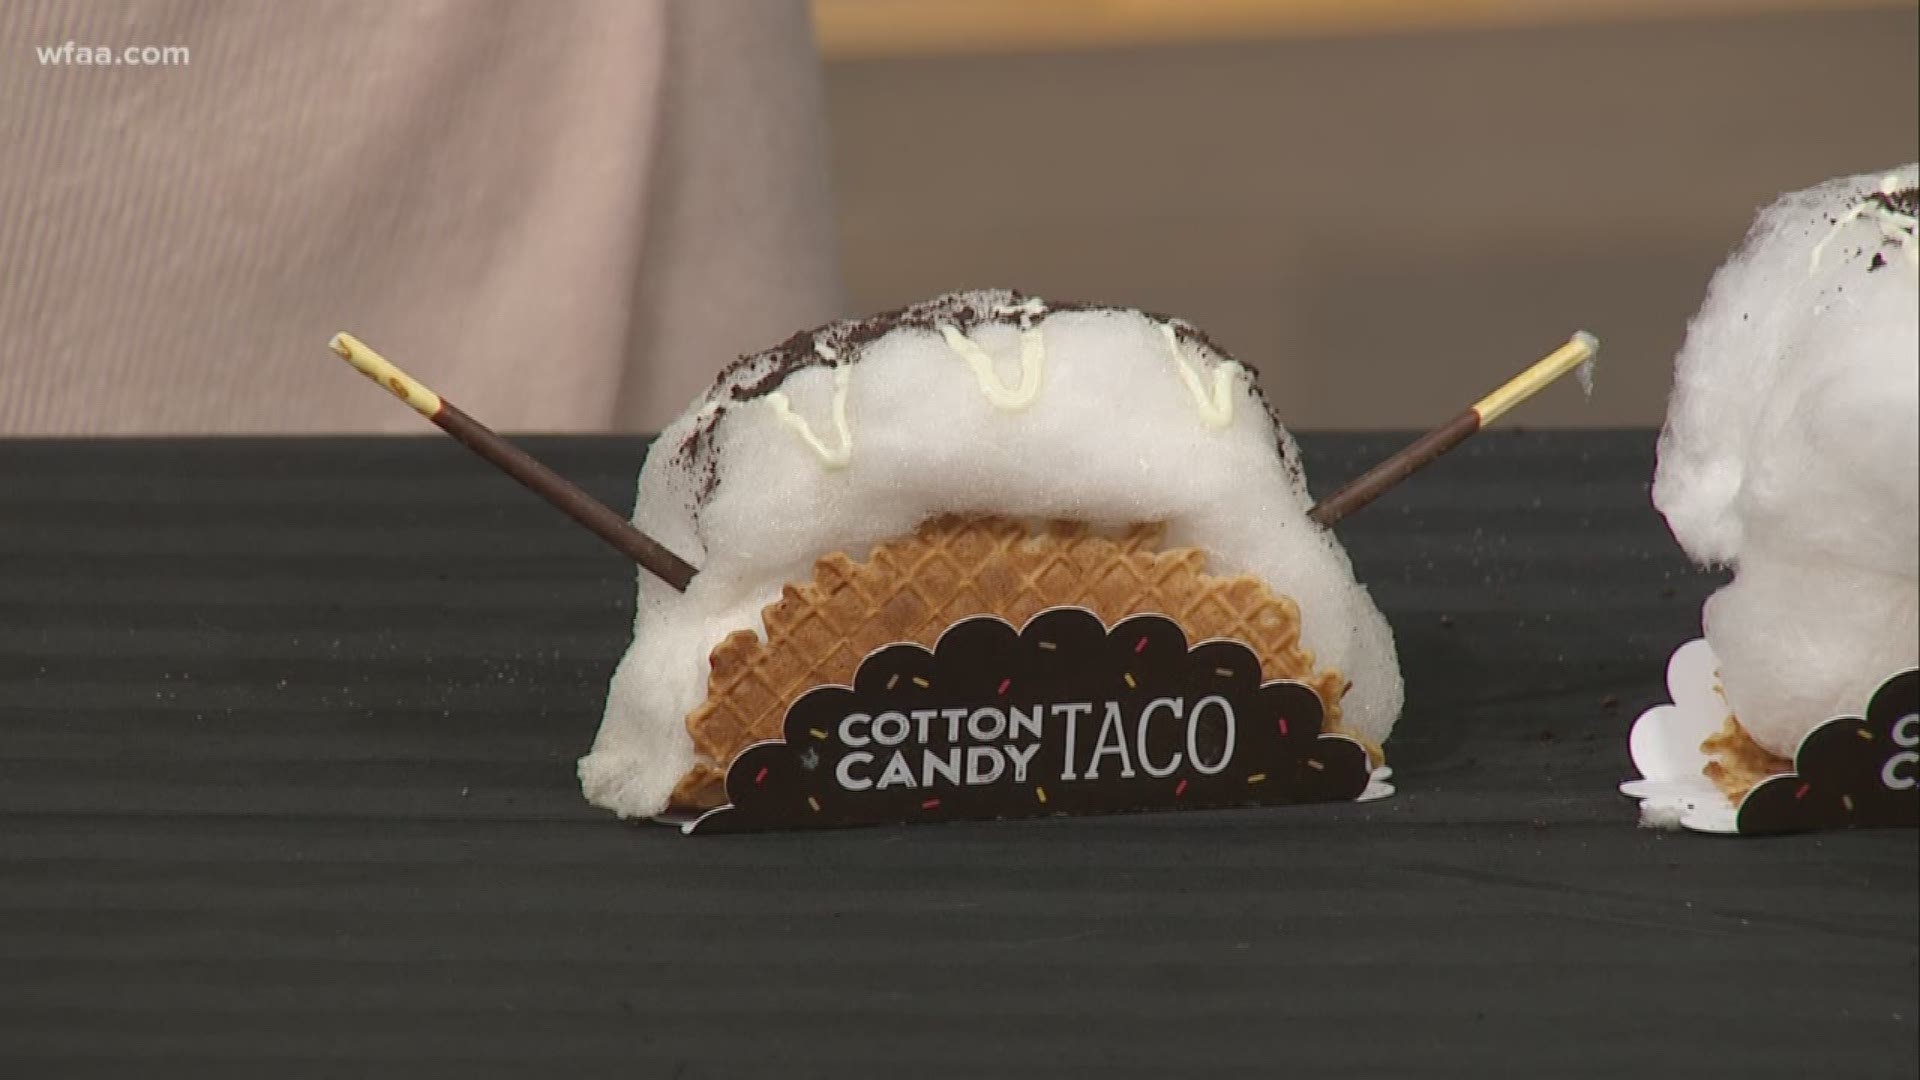 The Cotton Candy Taco from Justin and Rudy Martinez won "most creative" at this year's Big Tex Choice awards.